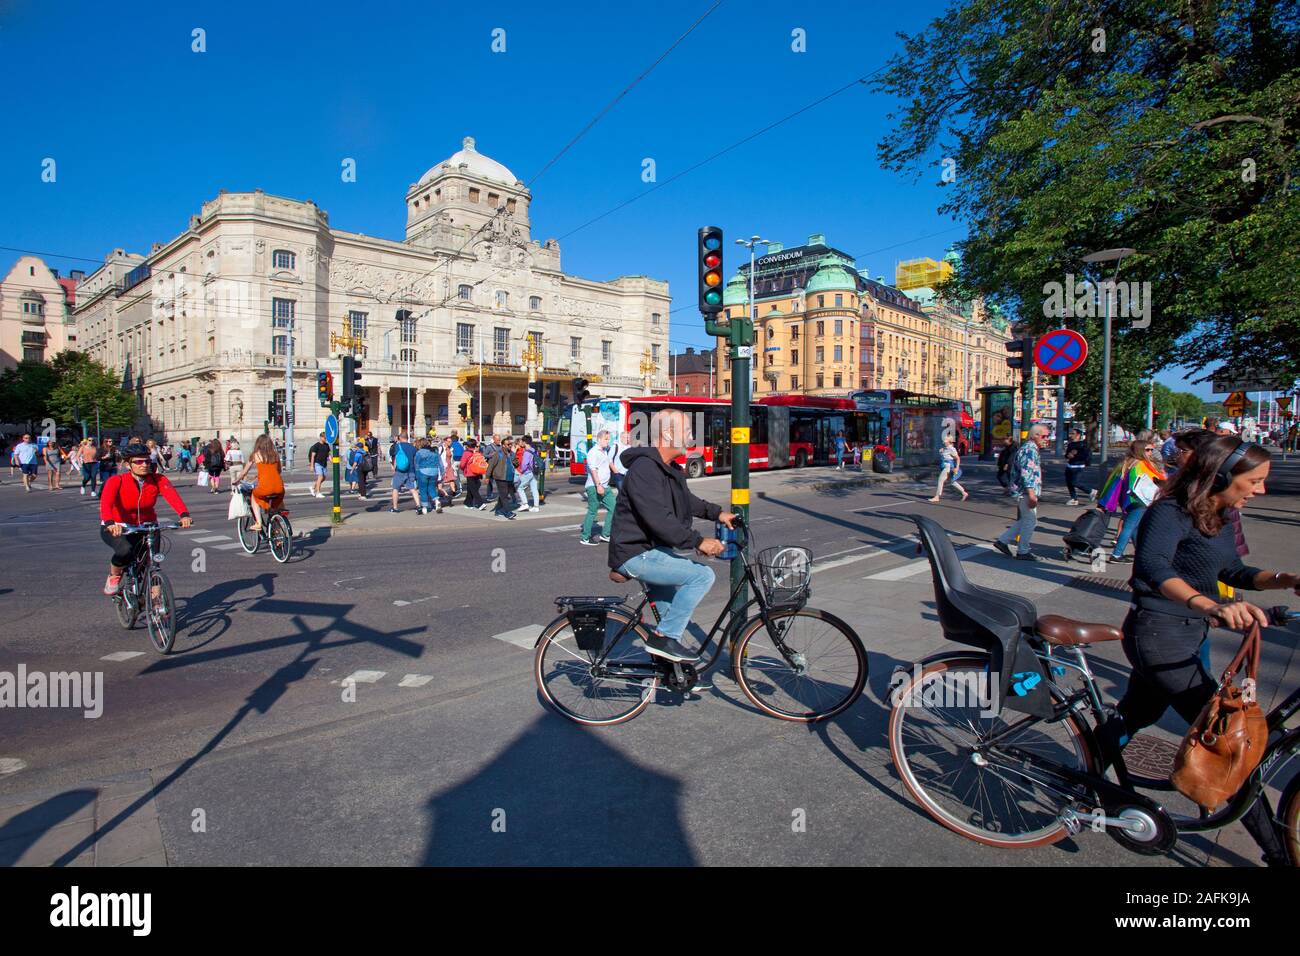 Sweden, Stockholm - The Royal Dramatic Theatre and traffic. Stock Photo